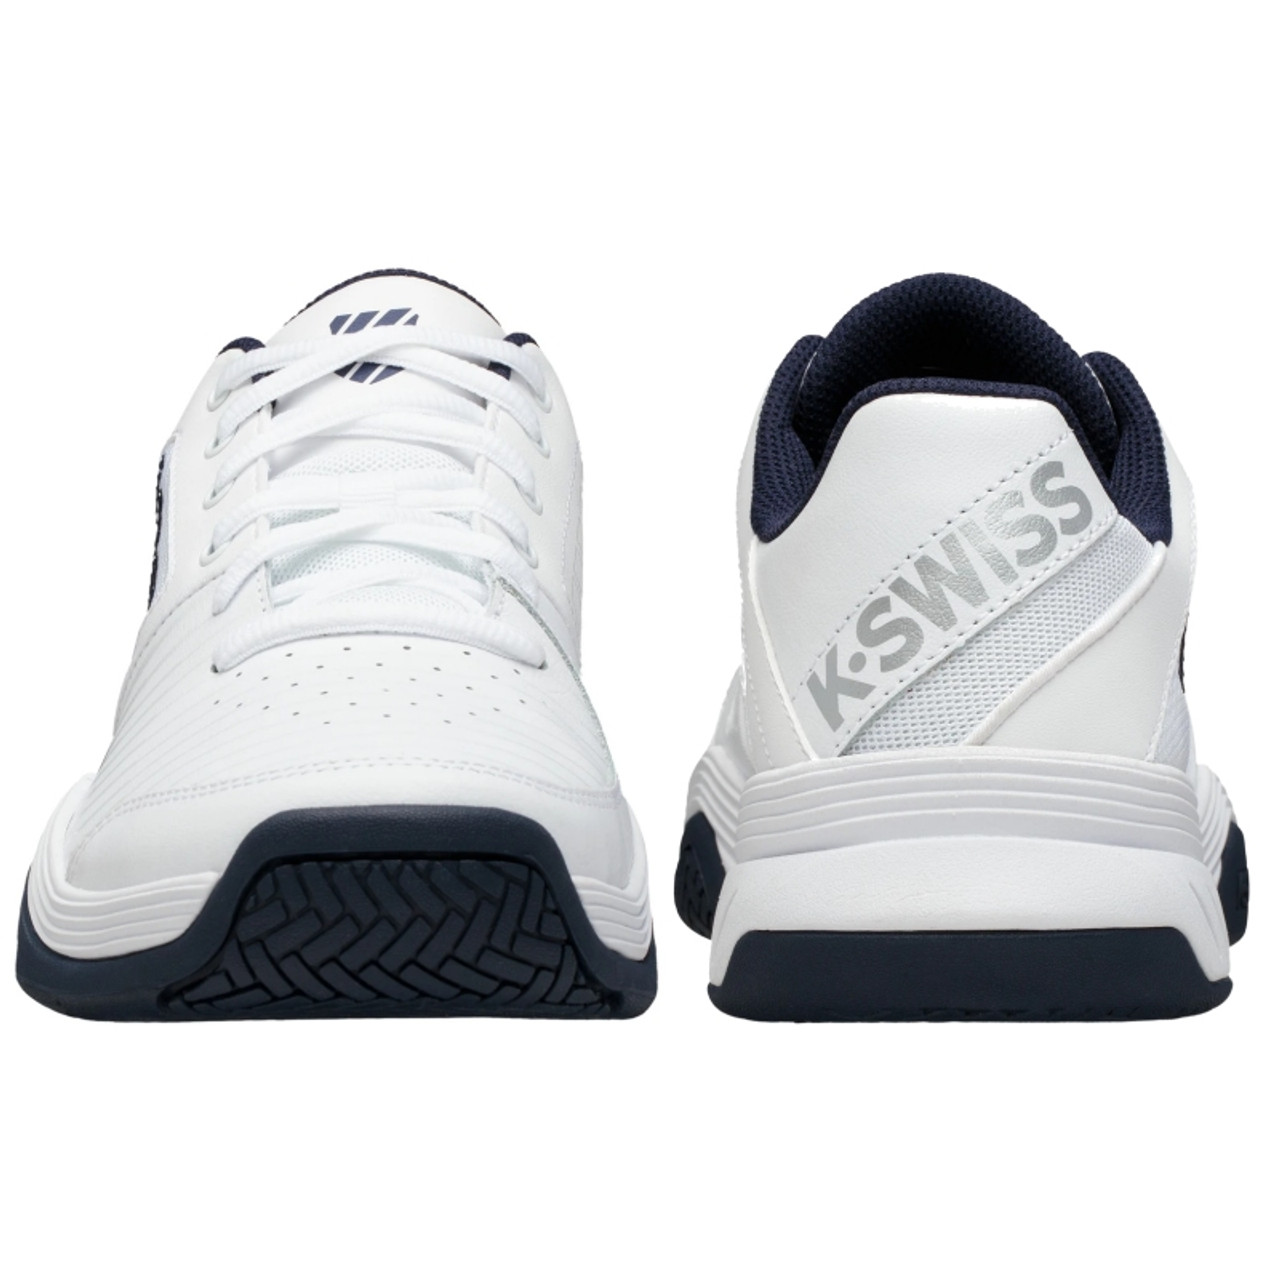 Zonnebrand voorspelling compressie K-Swiss Court Express leather sneakers for pickleball, tennis and more